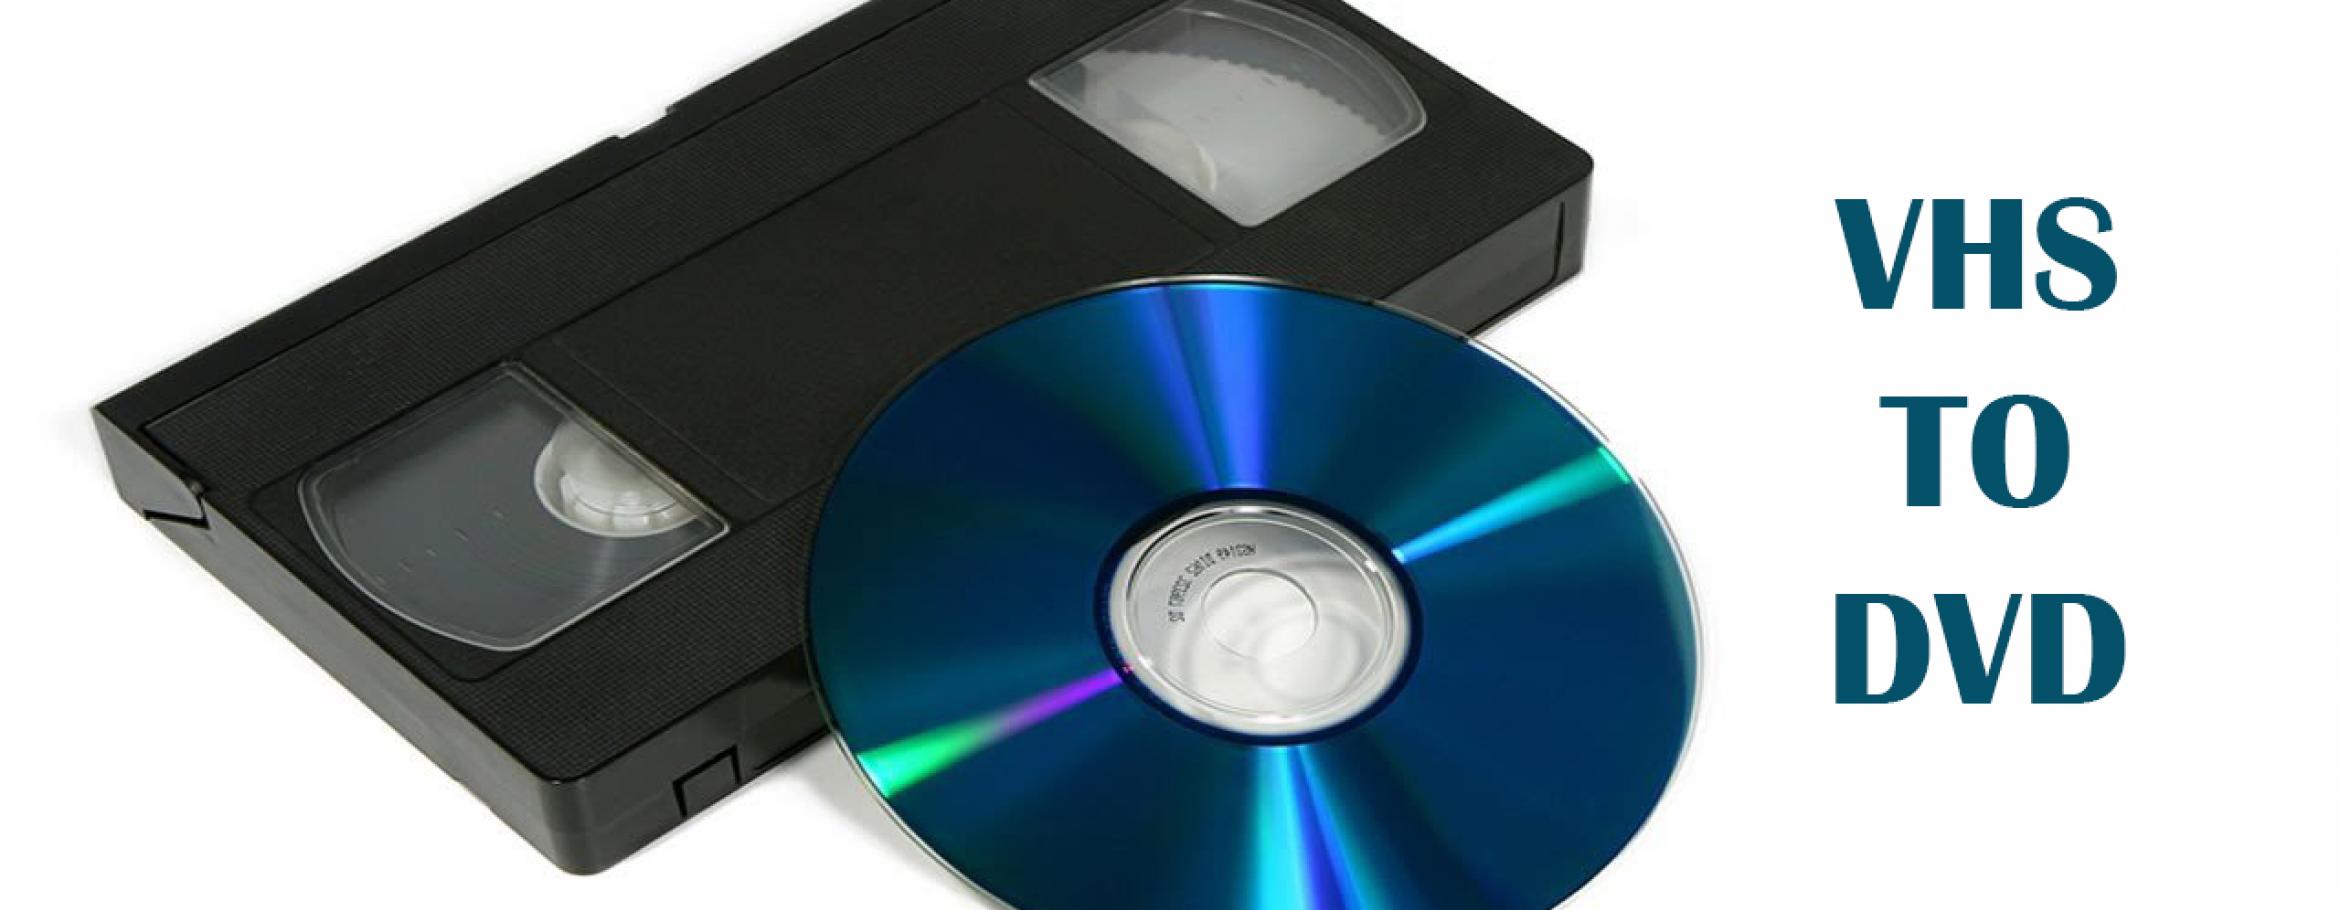 VHS to DVD - VHS tape transfer - Tri-Toy Productions NY, NYC, Westchester